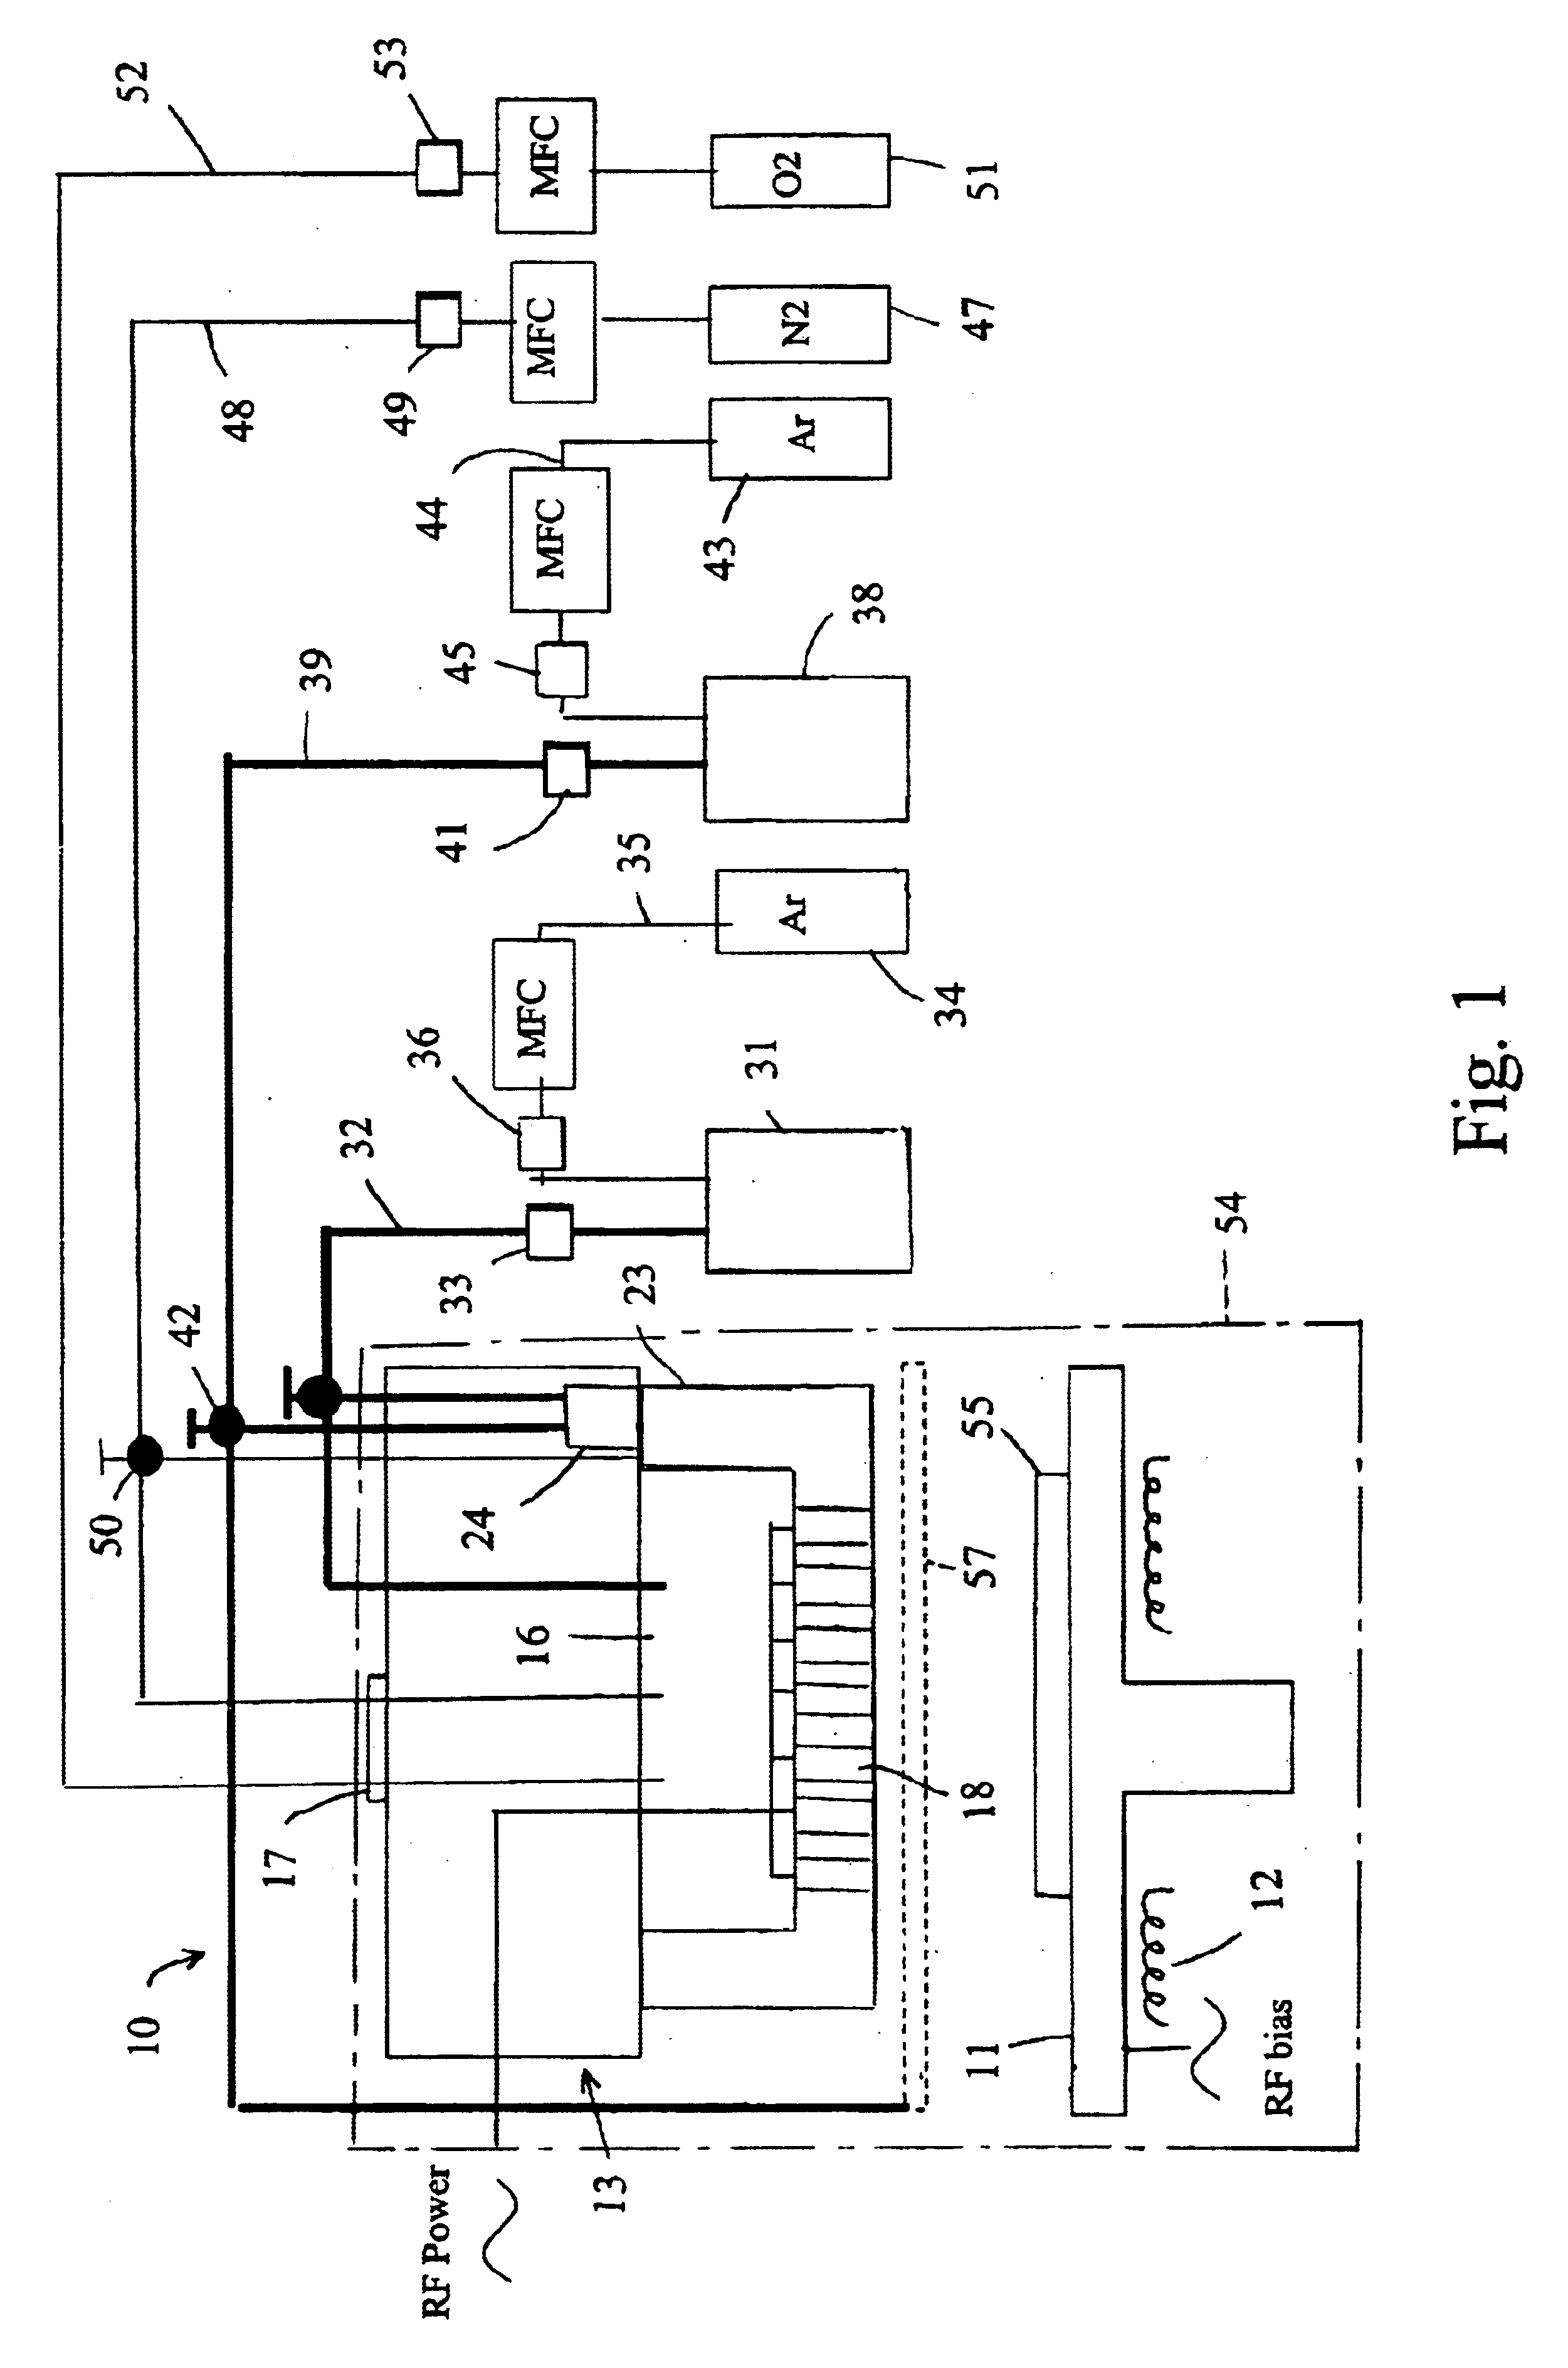 Apparatus for producing thin-film electrolyte